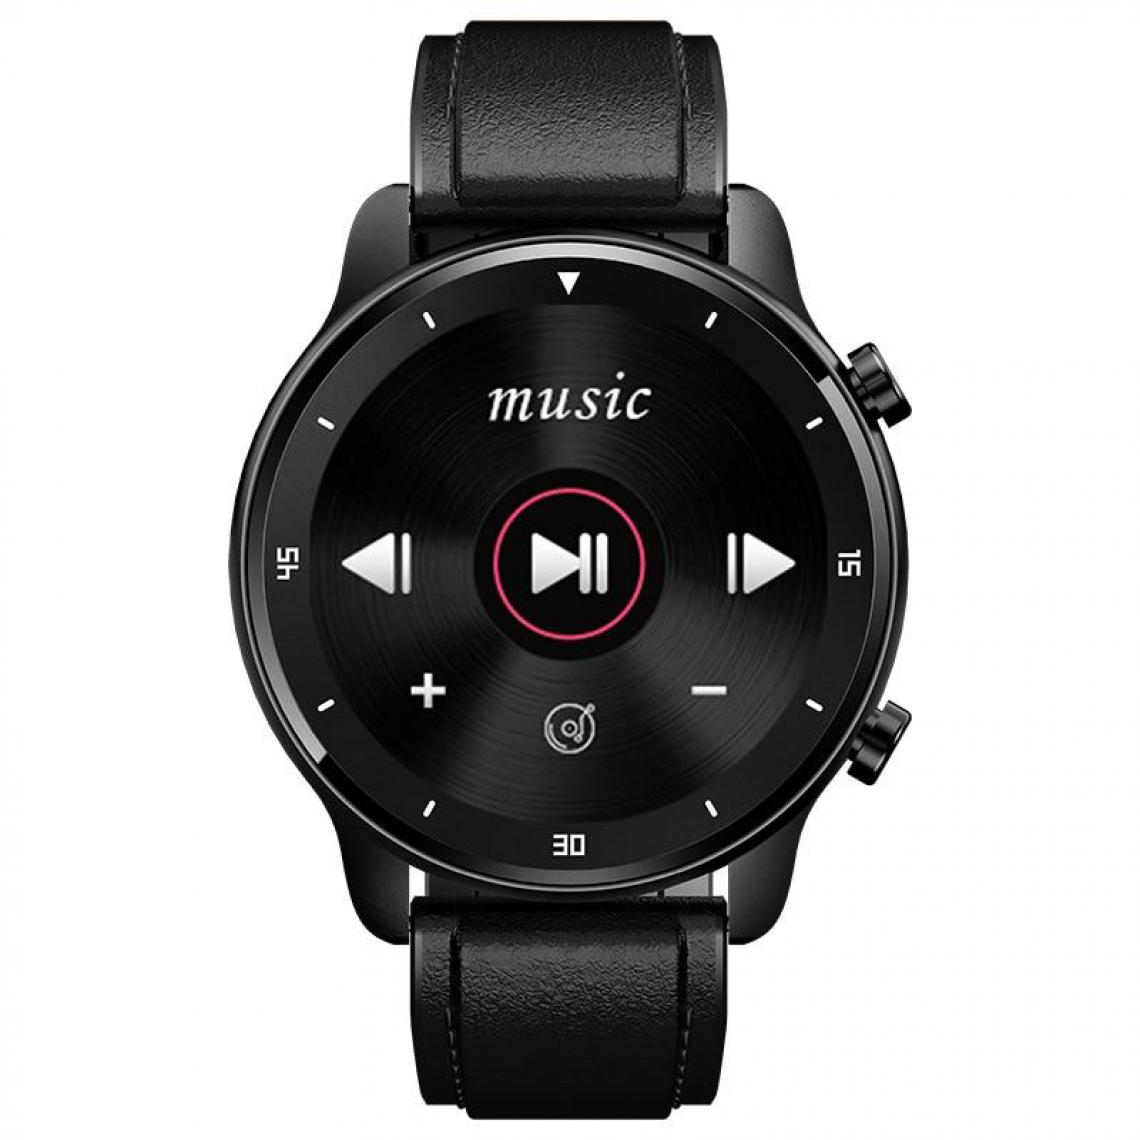 Justgreenbox - Play Music Smart Watch ( No need Smartphone ) Bluetooth Connect Speaker,earphone - Montre connectée